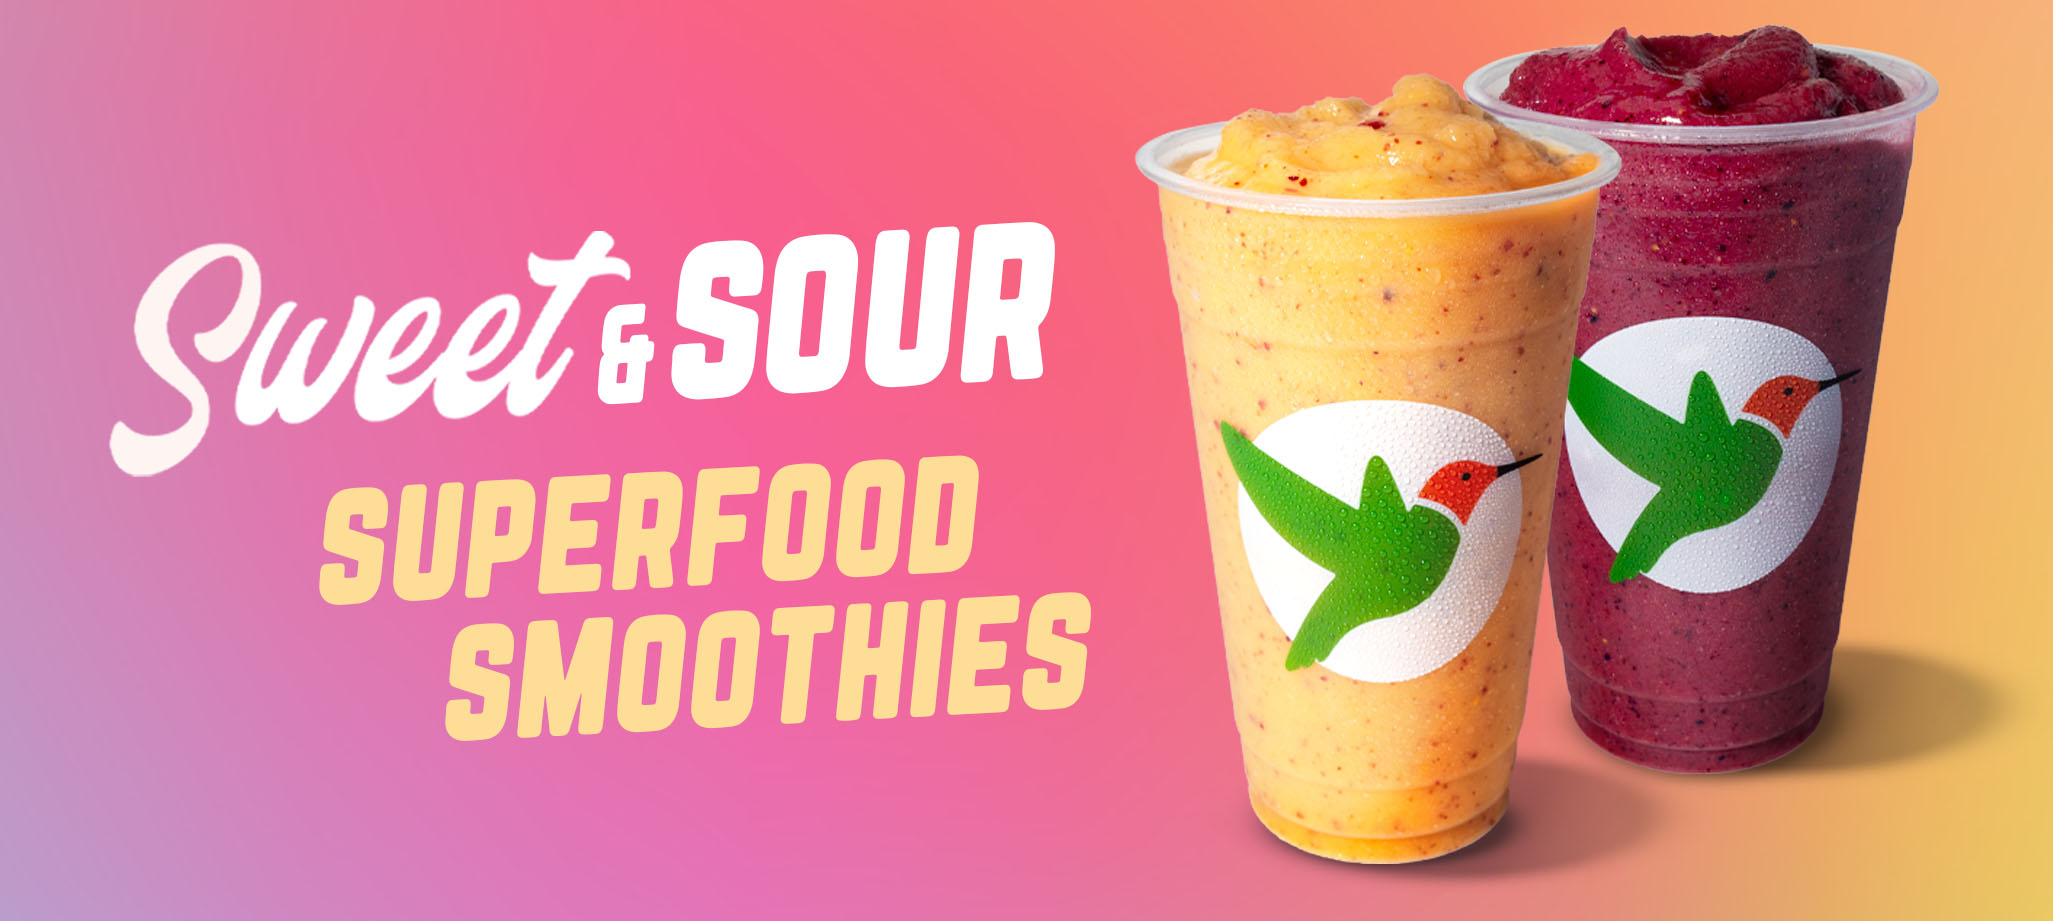 Sweet & Sour Superfood Smoothies